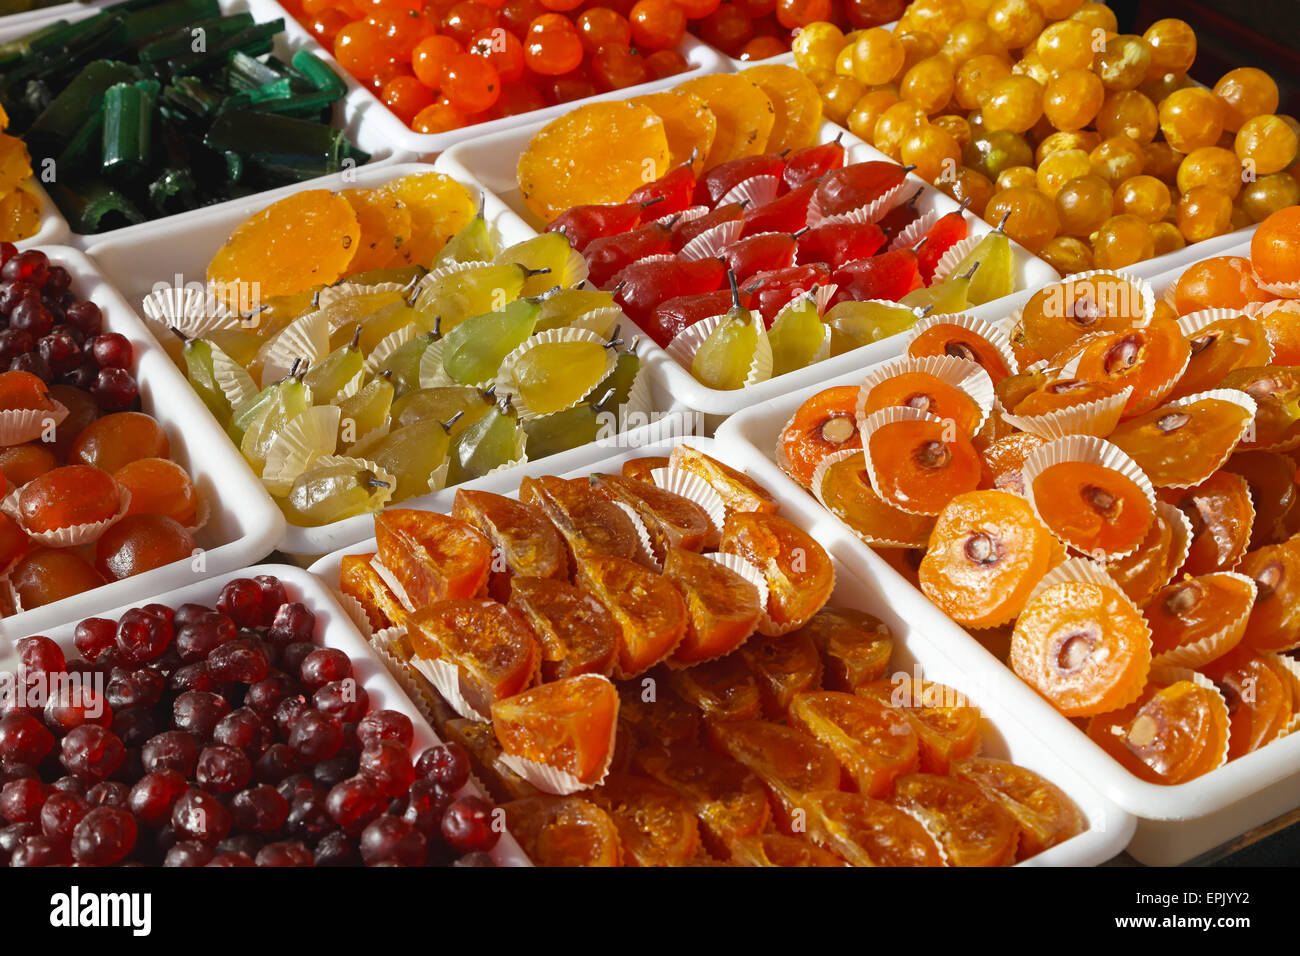 Candied fruits Stock Photo